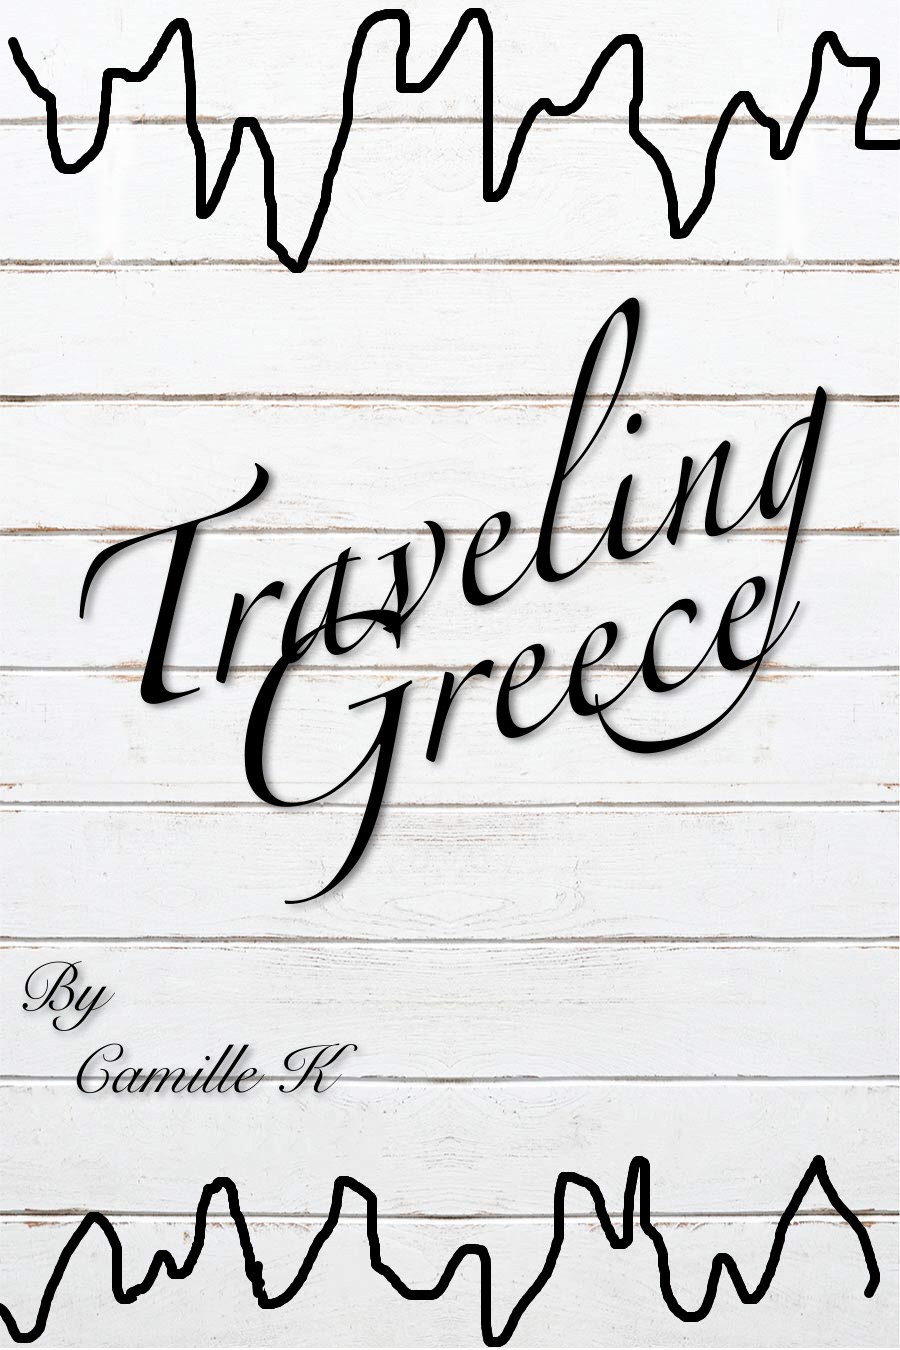 Travelling Greece by Camille K